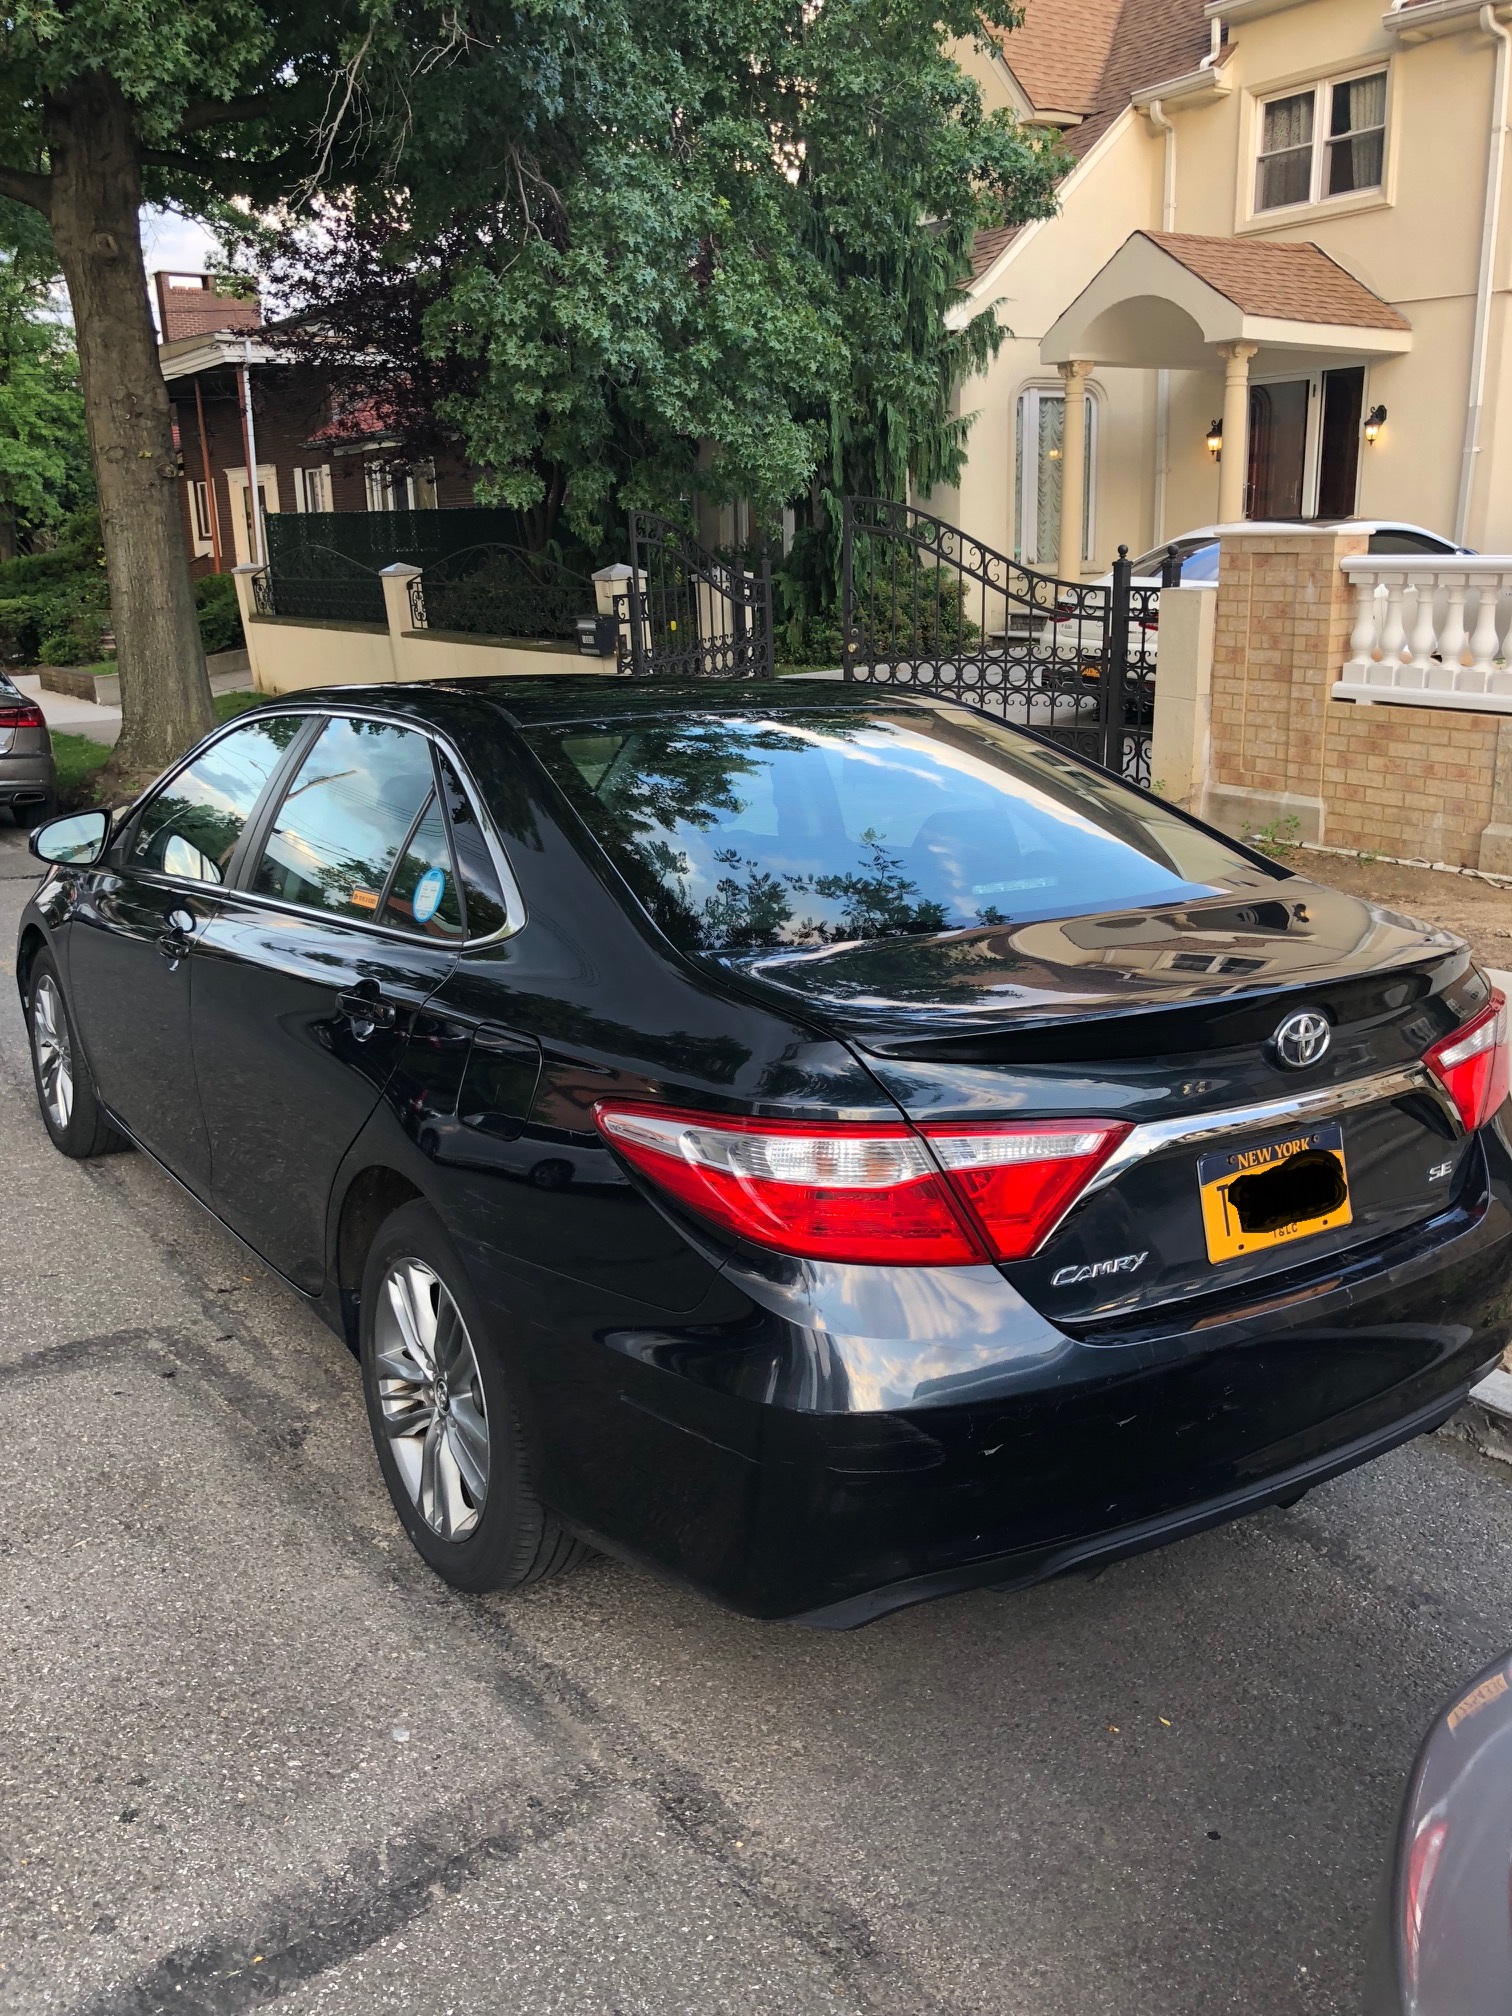 TLC Toyota Camry for RENT for UBER/LYFT - $275